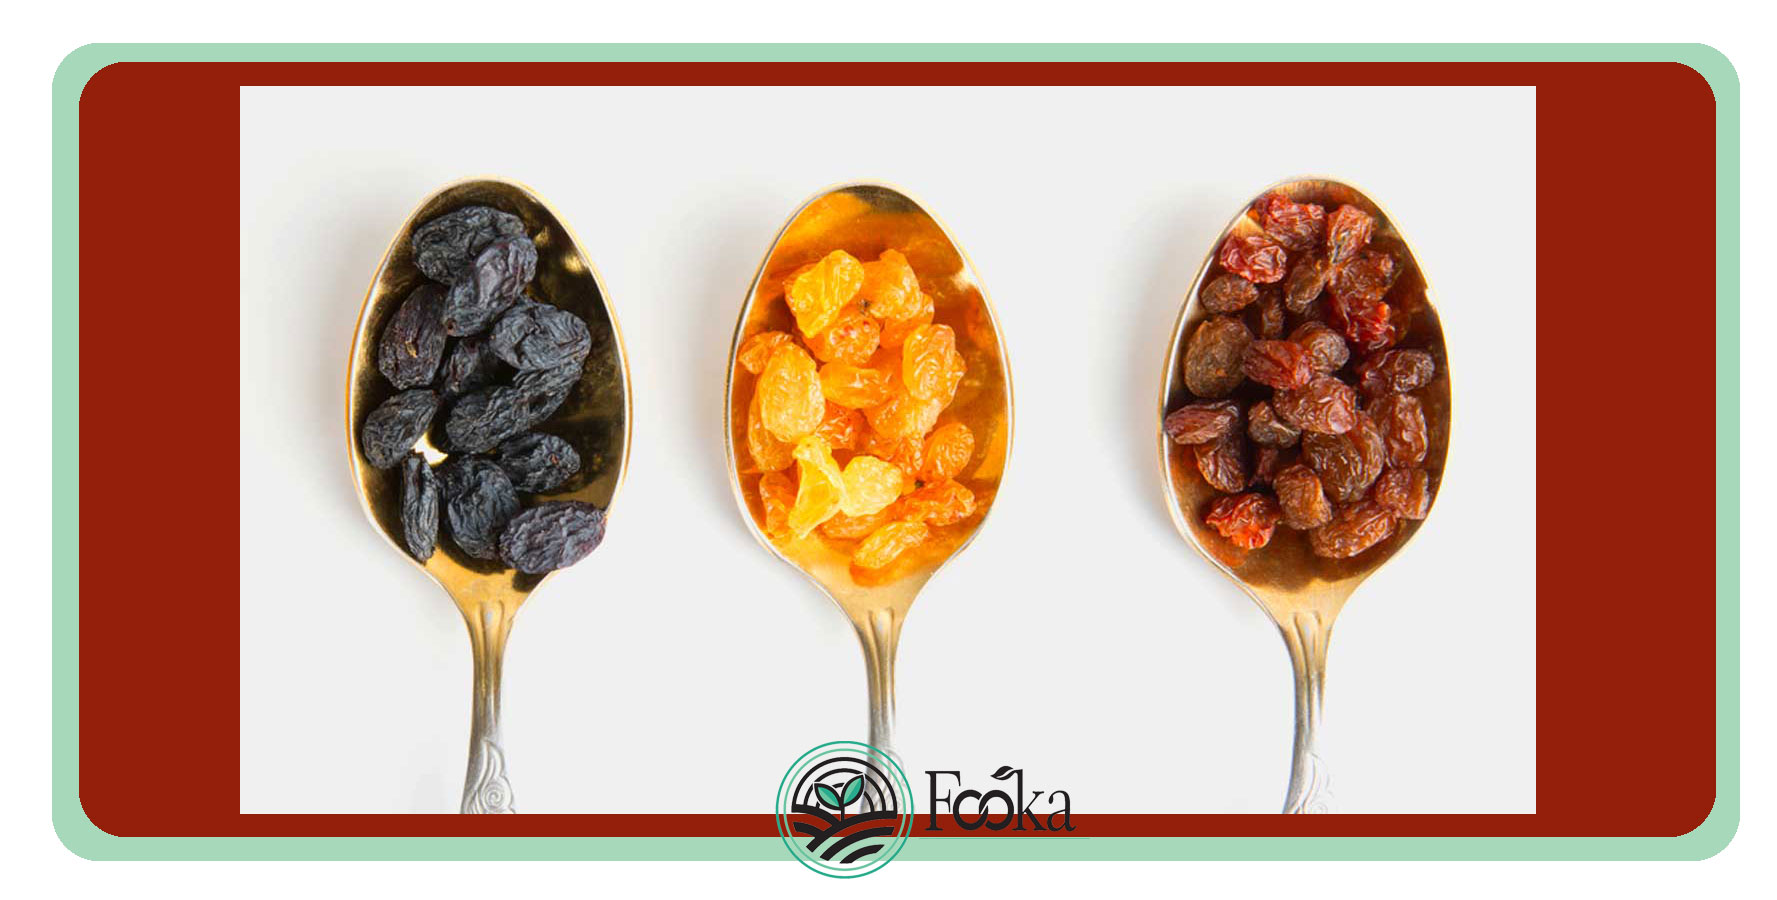 what is the difference between a currant and a raisin?